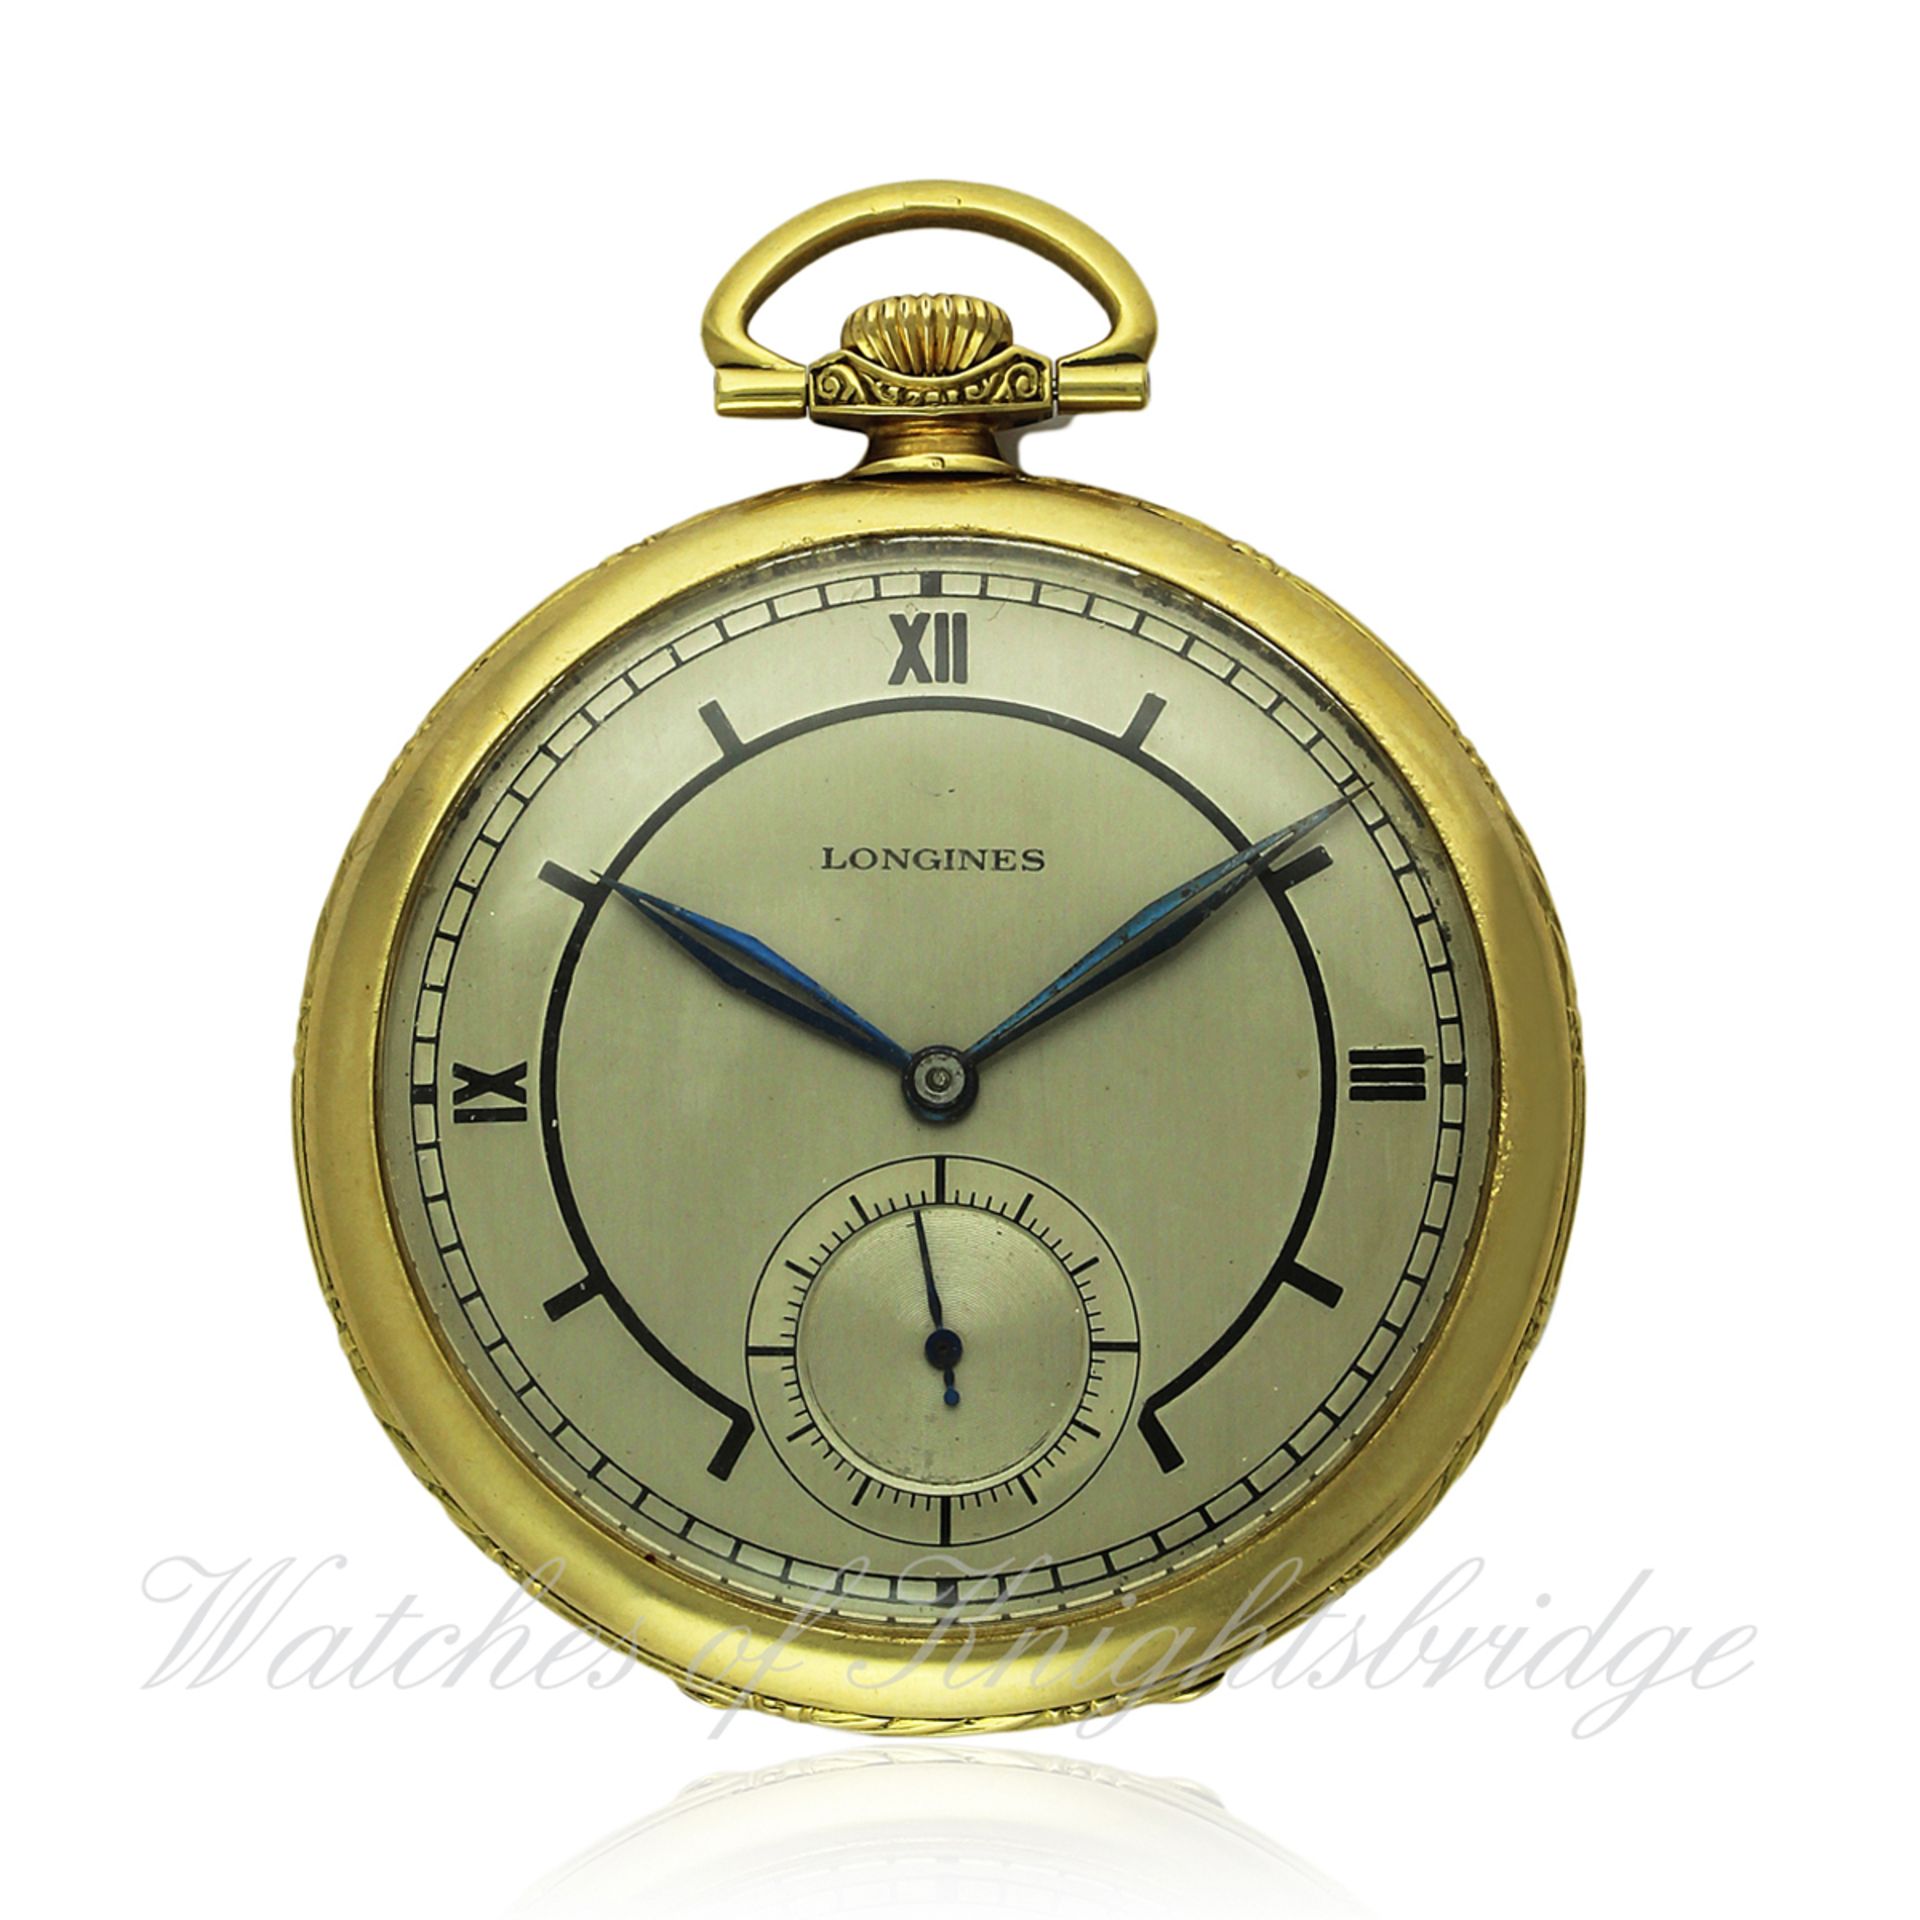 A GENTLEMAN`S 18K SOLID GOLD LONGINES POCKET WATCH CIRCA 1930s D: Silver dial with applied Roman